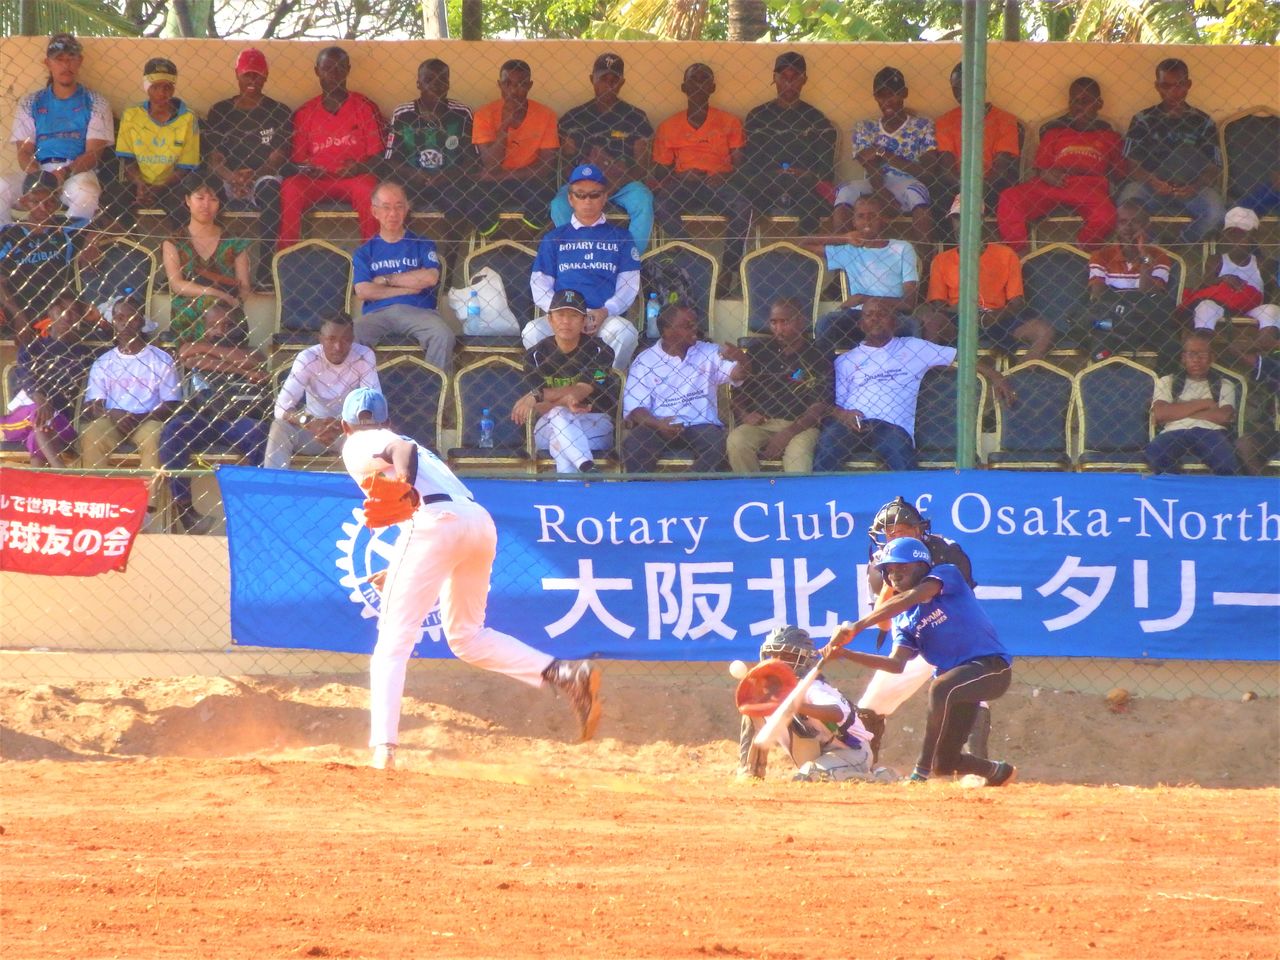 A national tournament held in Tanzania.  Whether throwing or batting, in typical African fashion, the players are unconventional.  (© Tomonari Shin'ya)